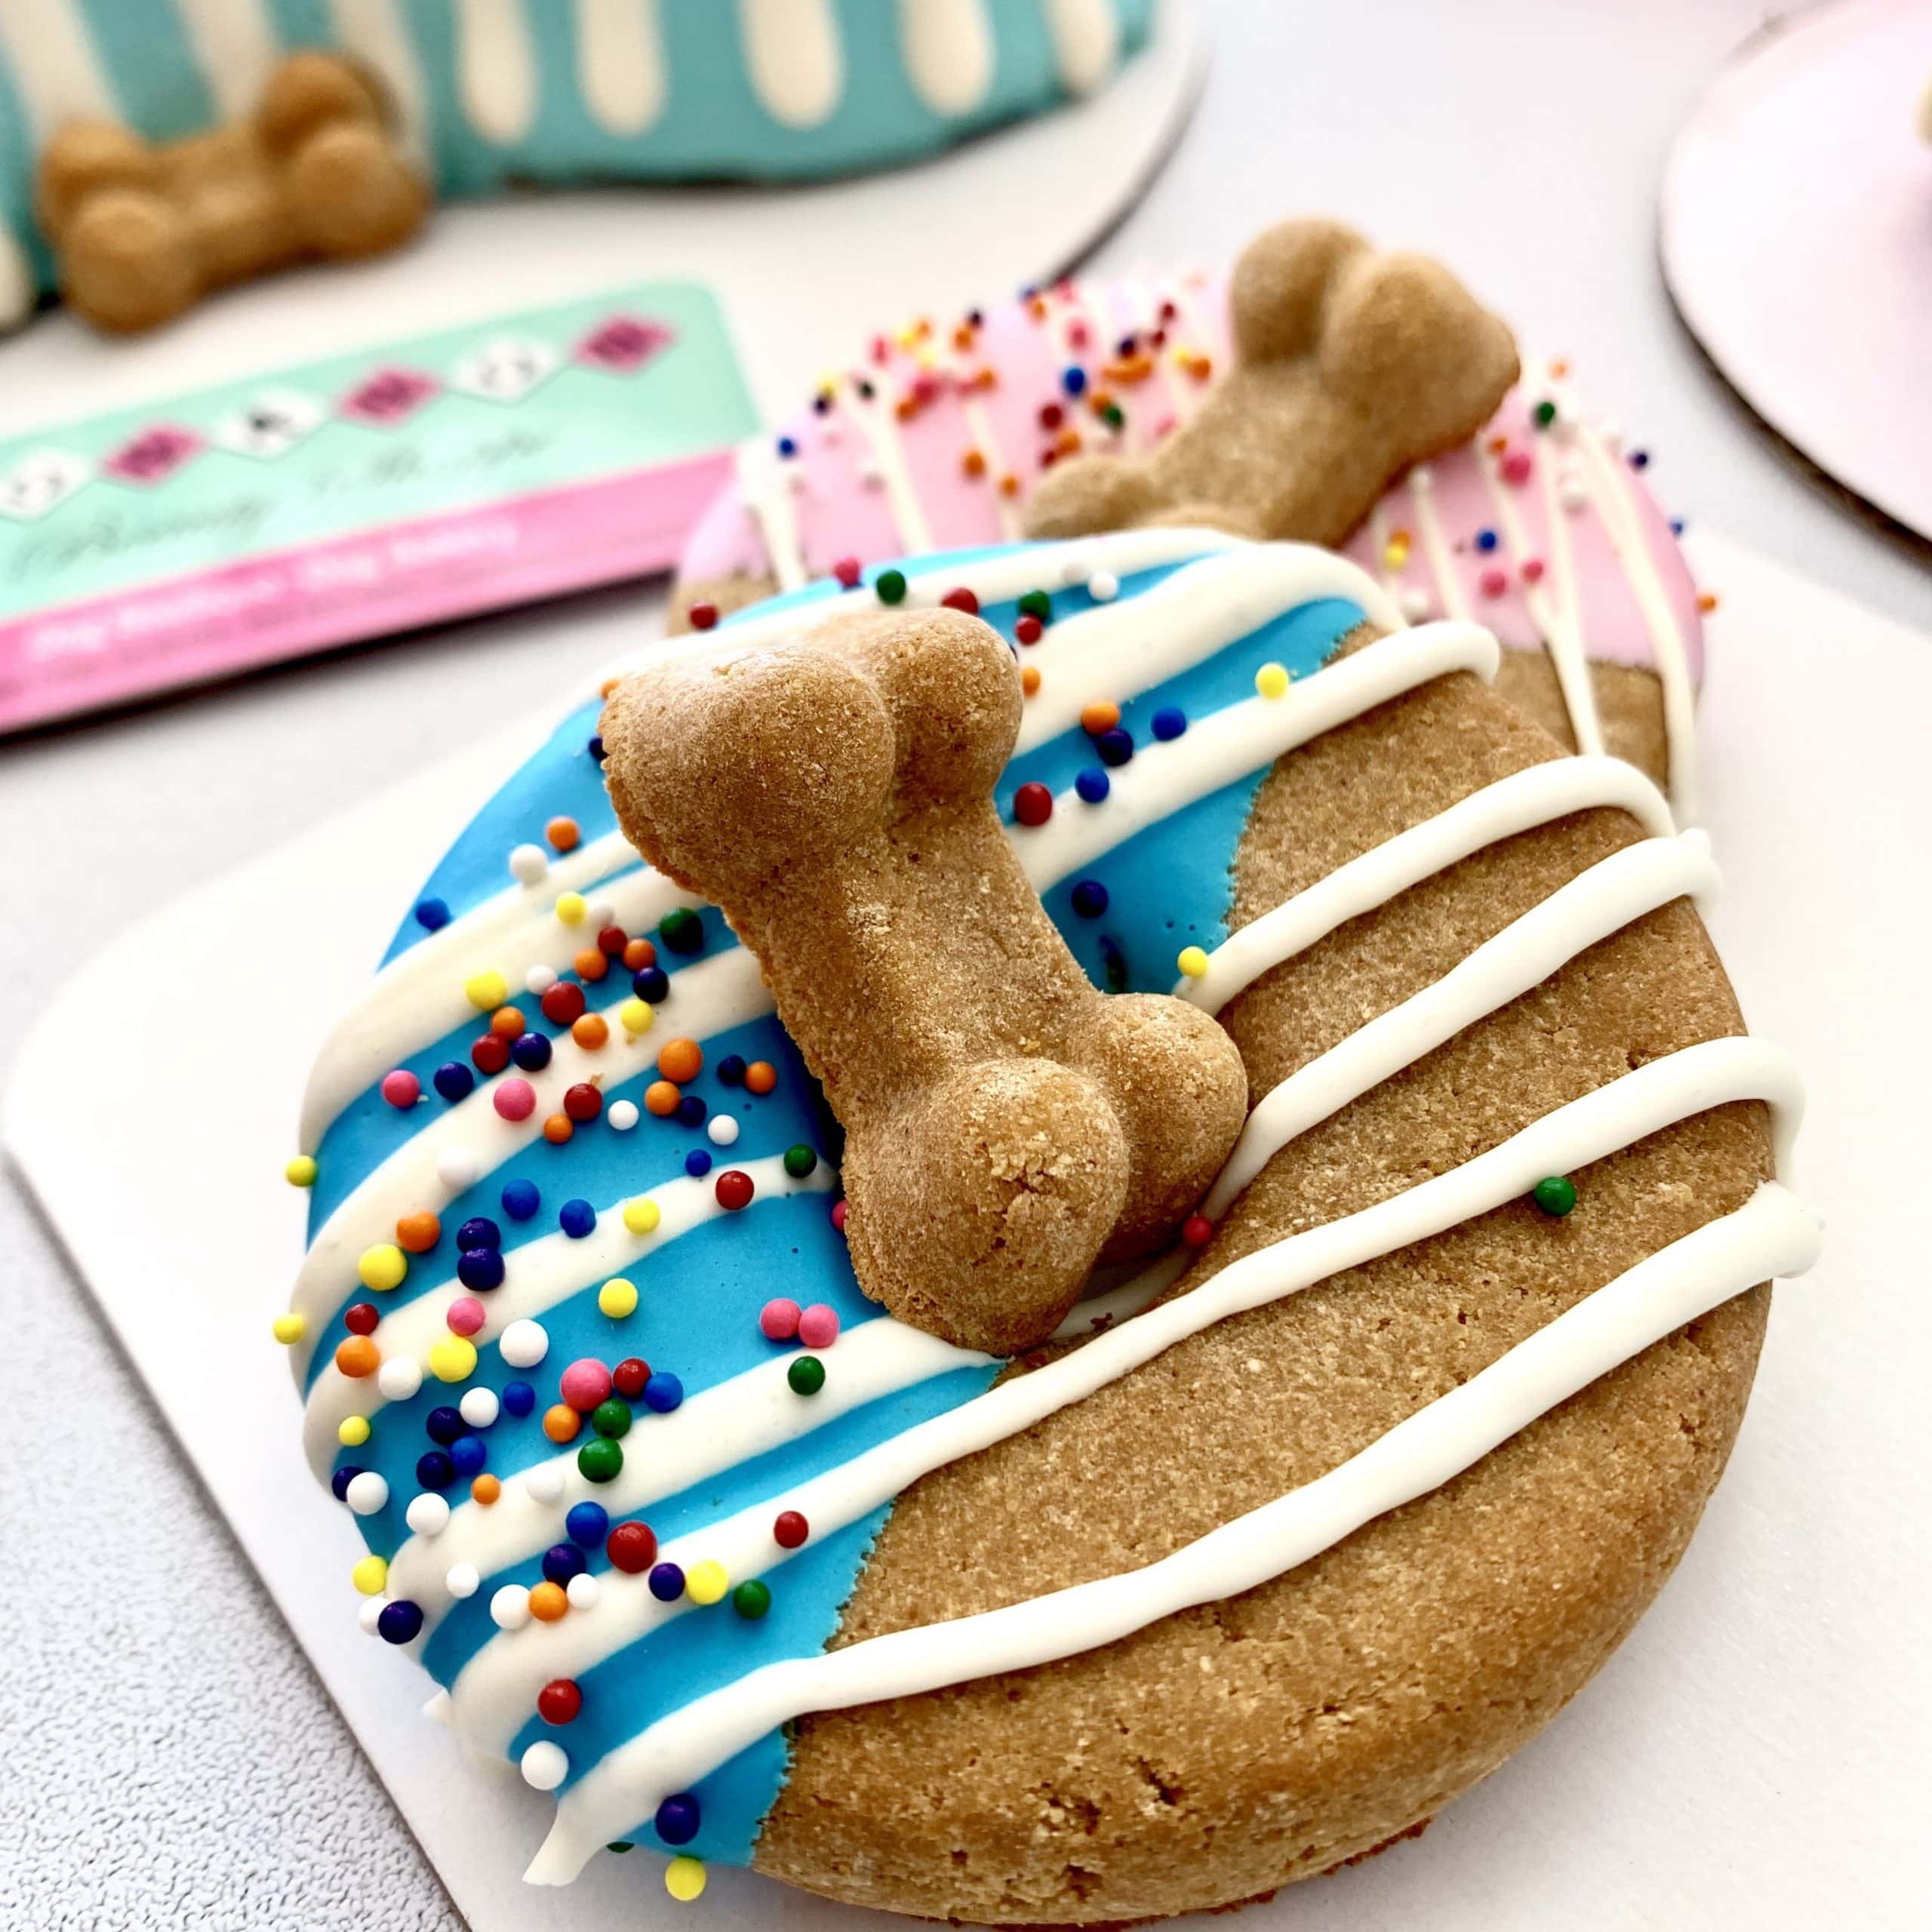 Dog Donuts that delight!